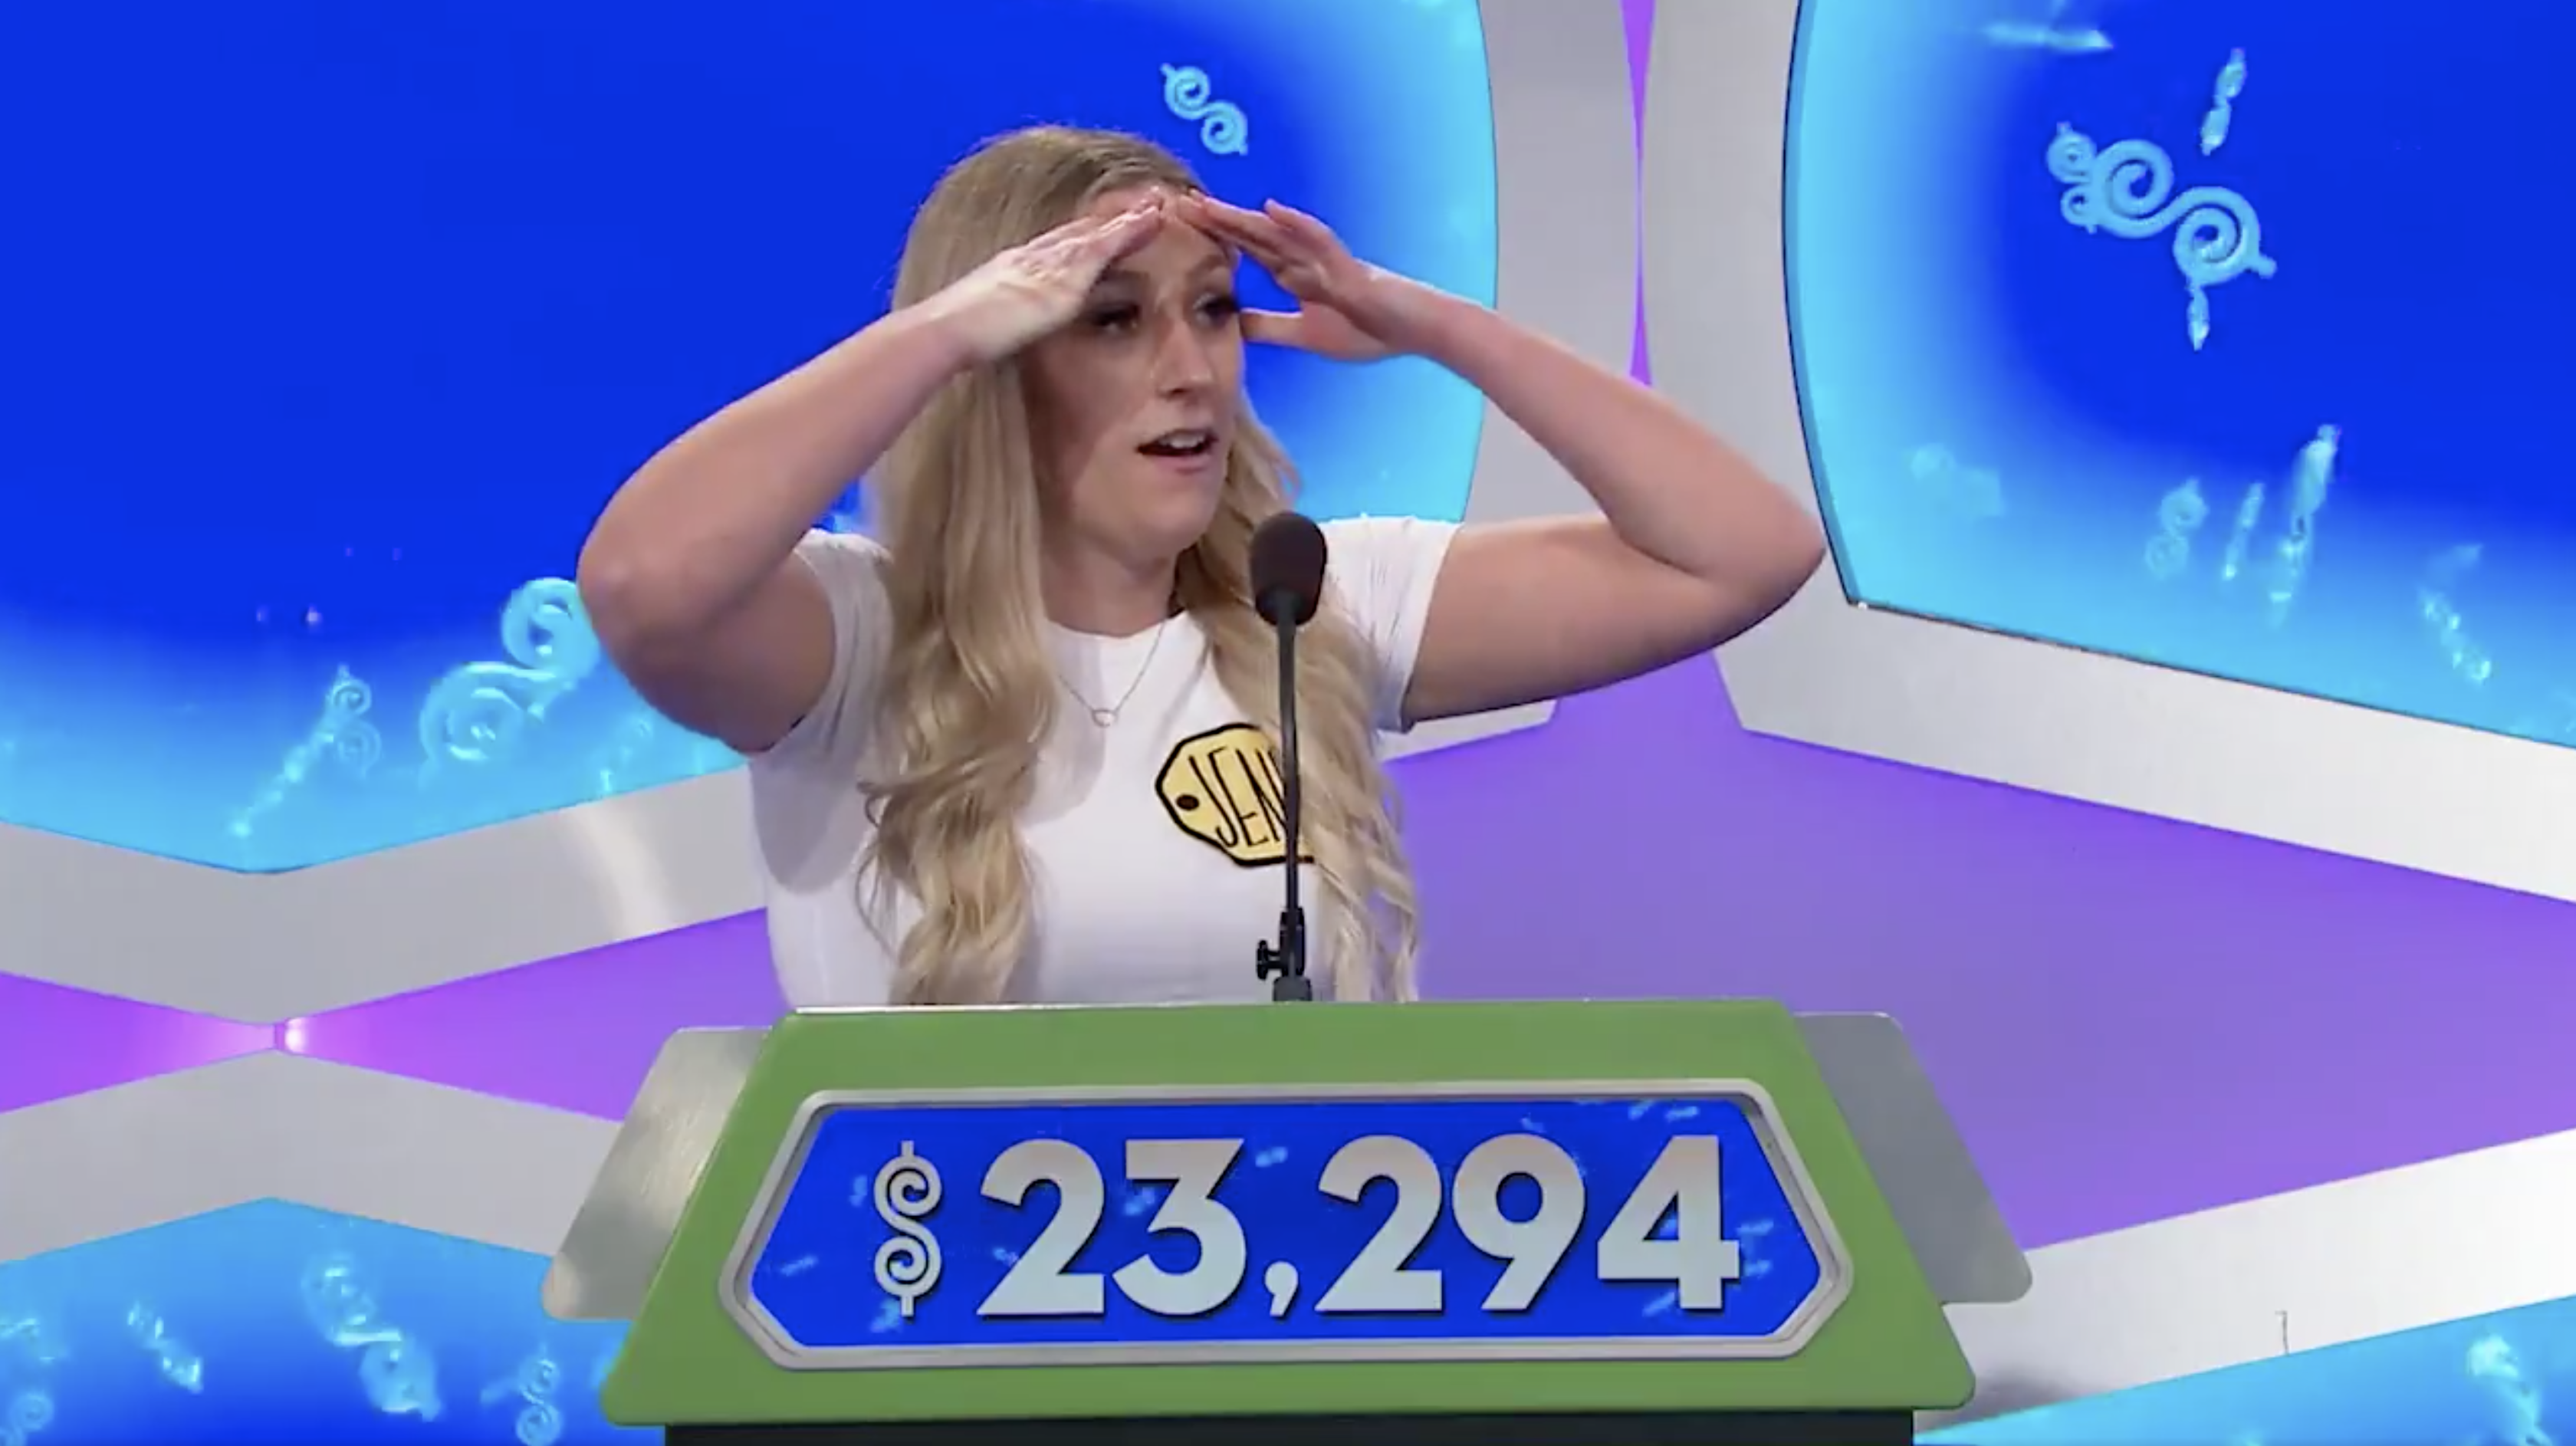 price is right tickets 2021